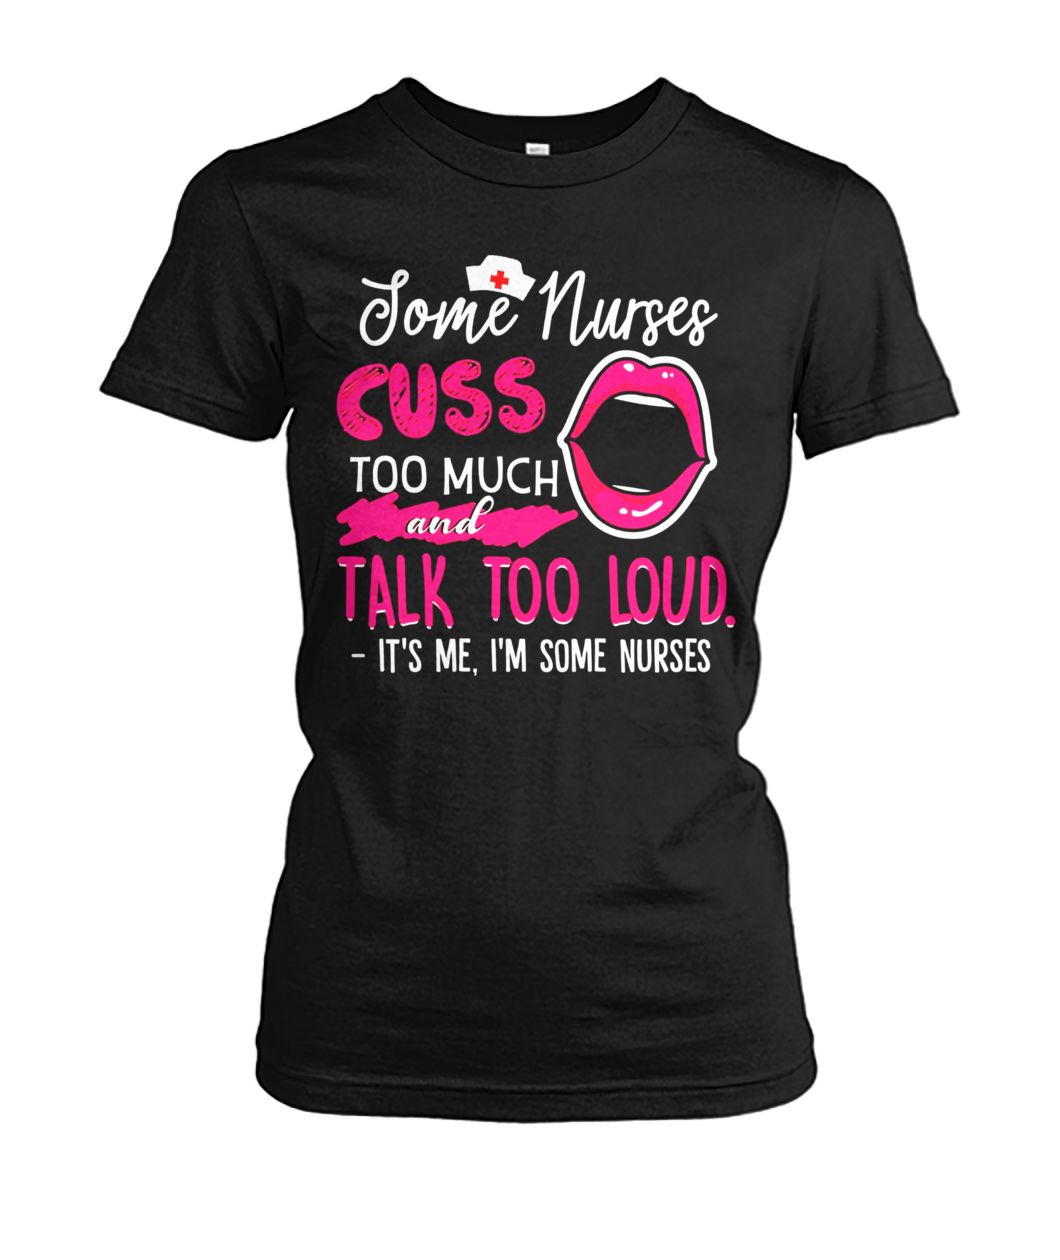 Some nurses cuss to much and talk too loud it's me I'm some nurses women's crew tee